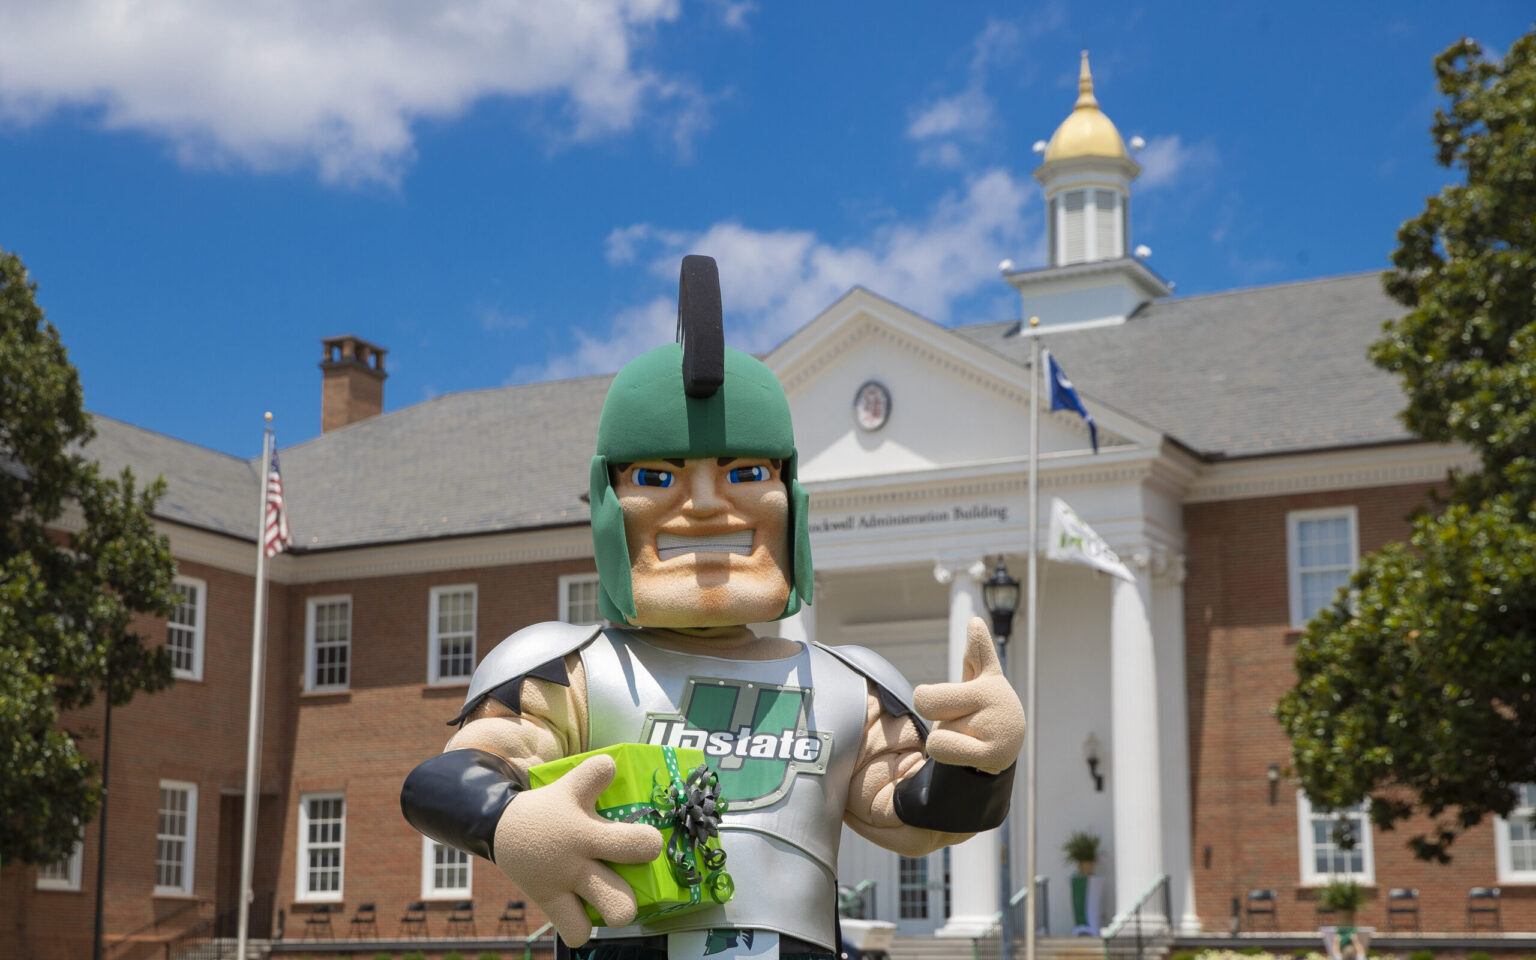 Sparty in front of Admin Building